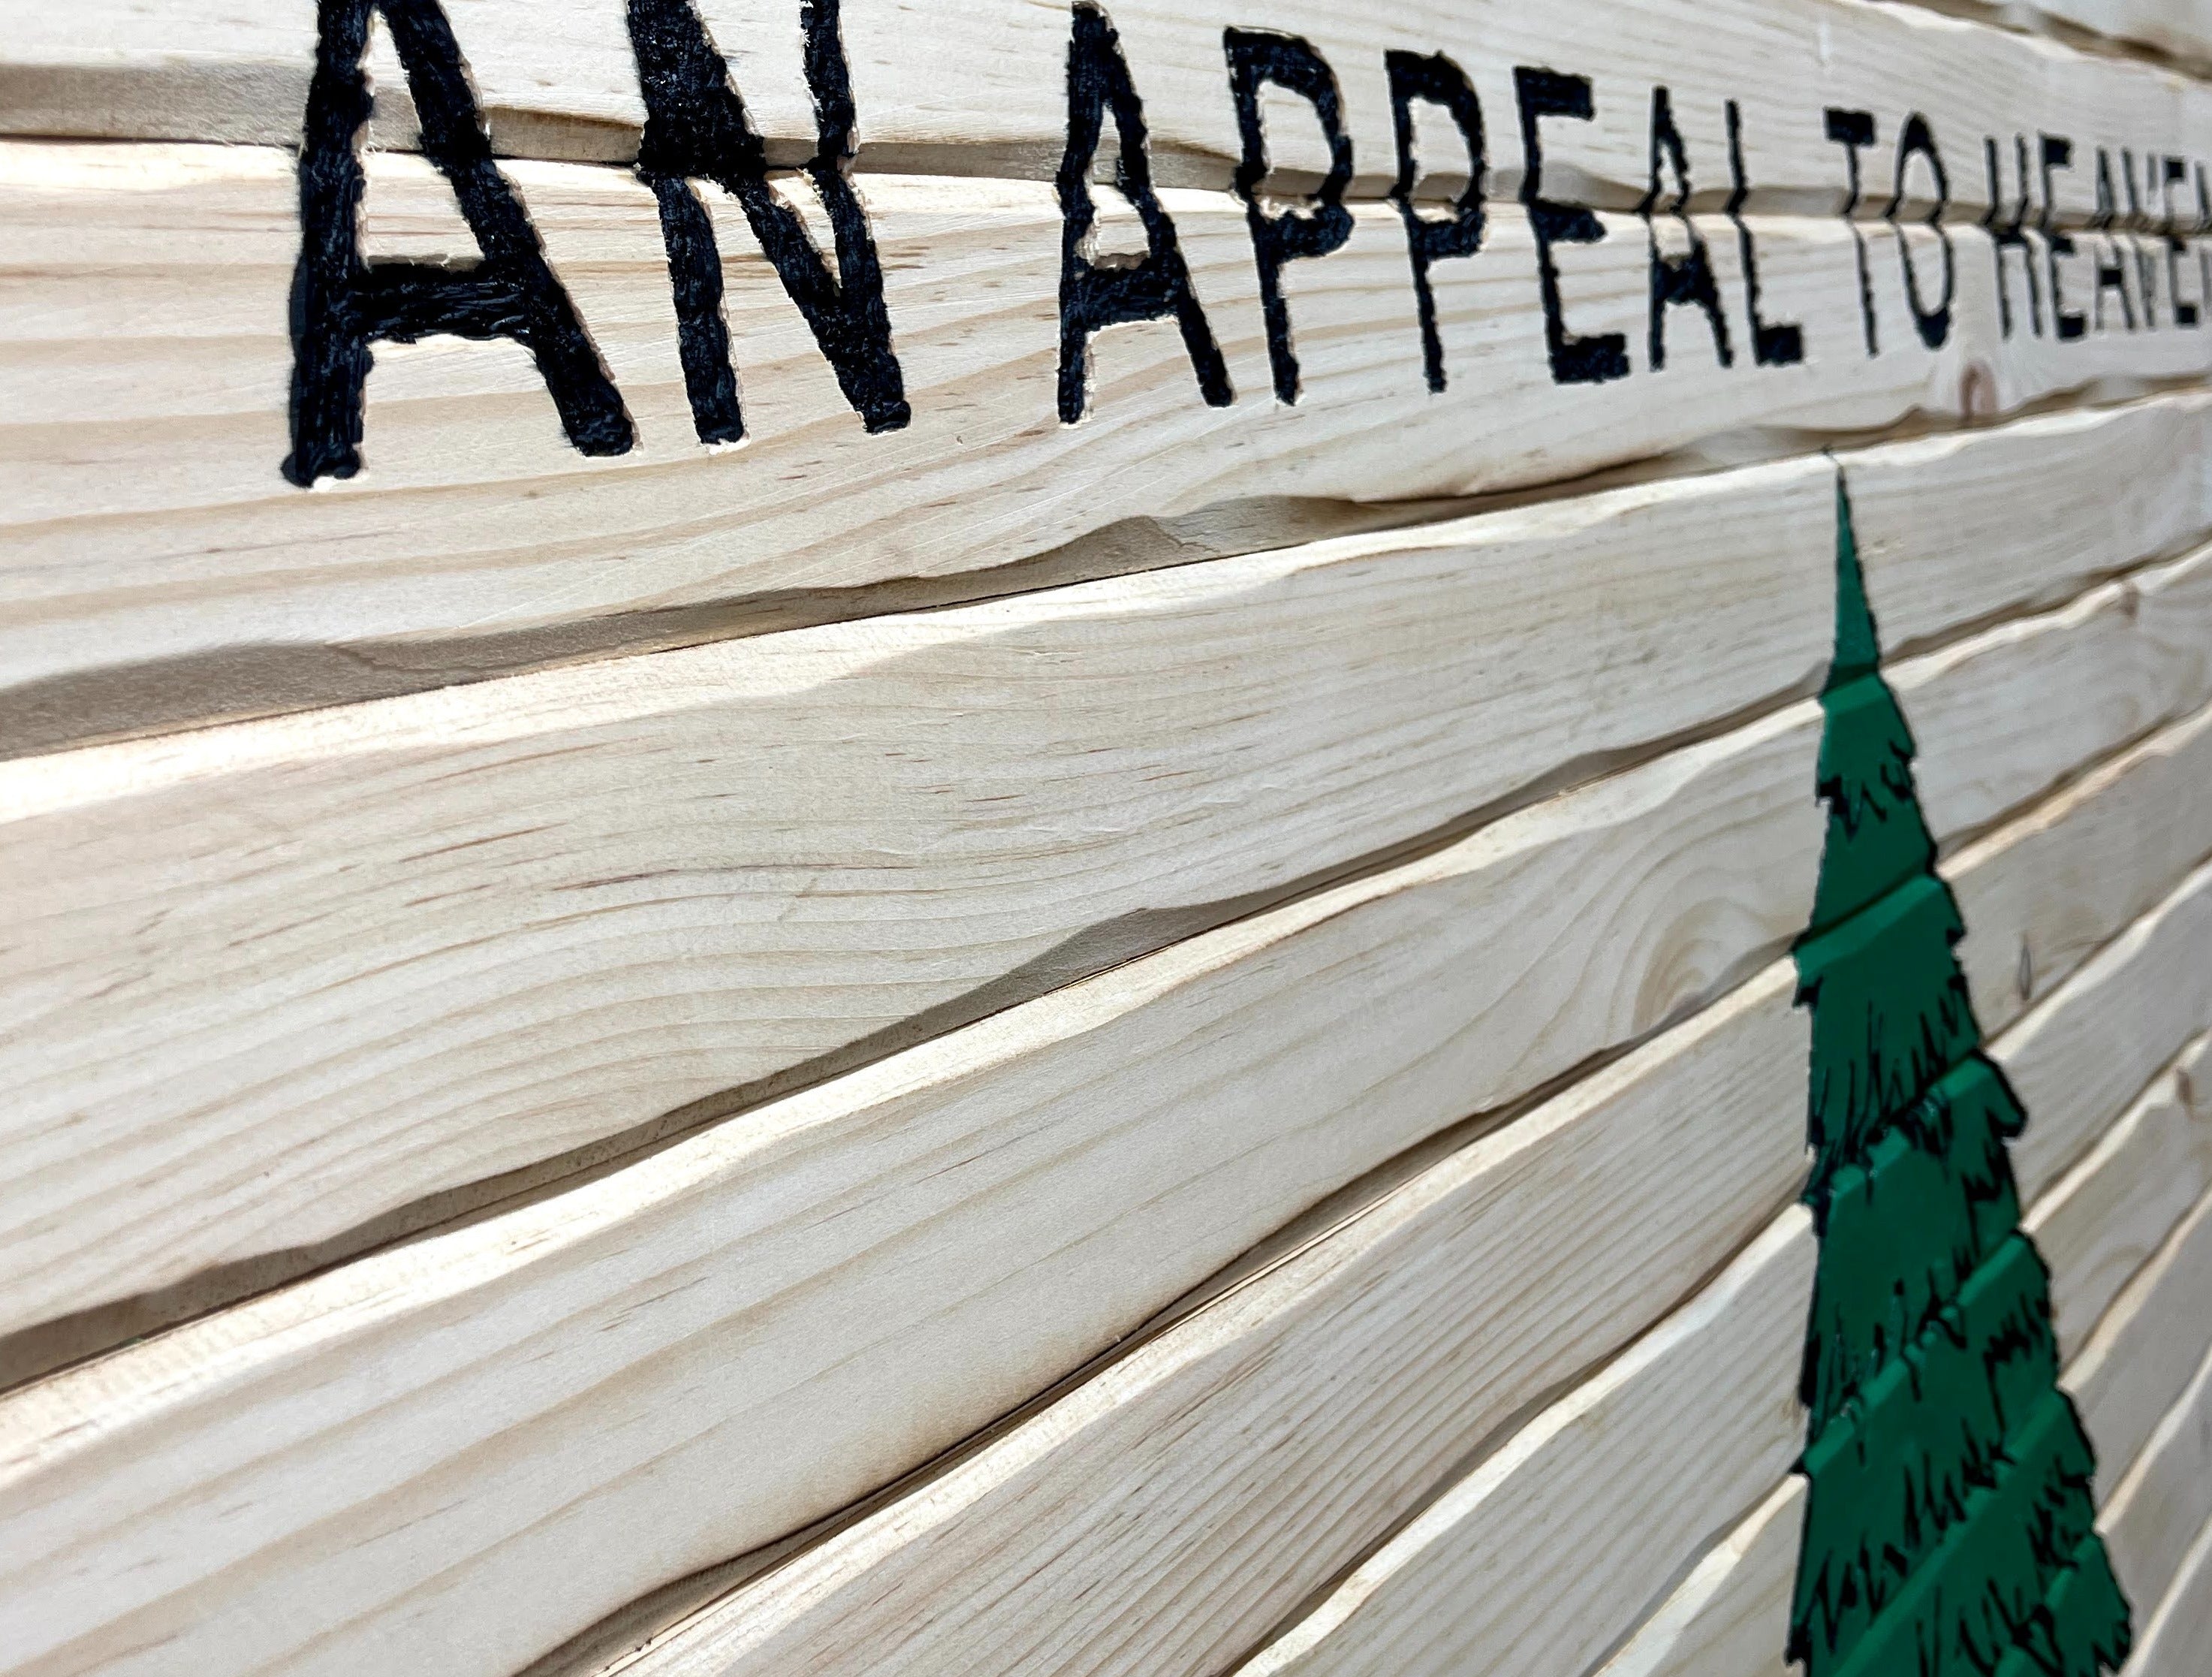 An Appeal To Heaven Handcarved Wooden Flag